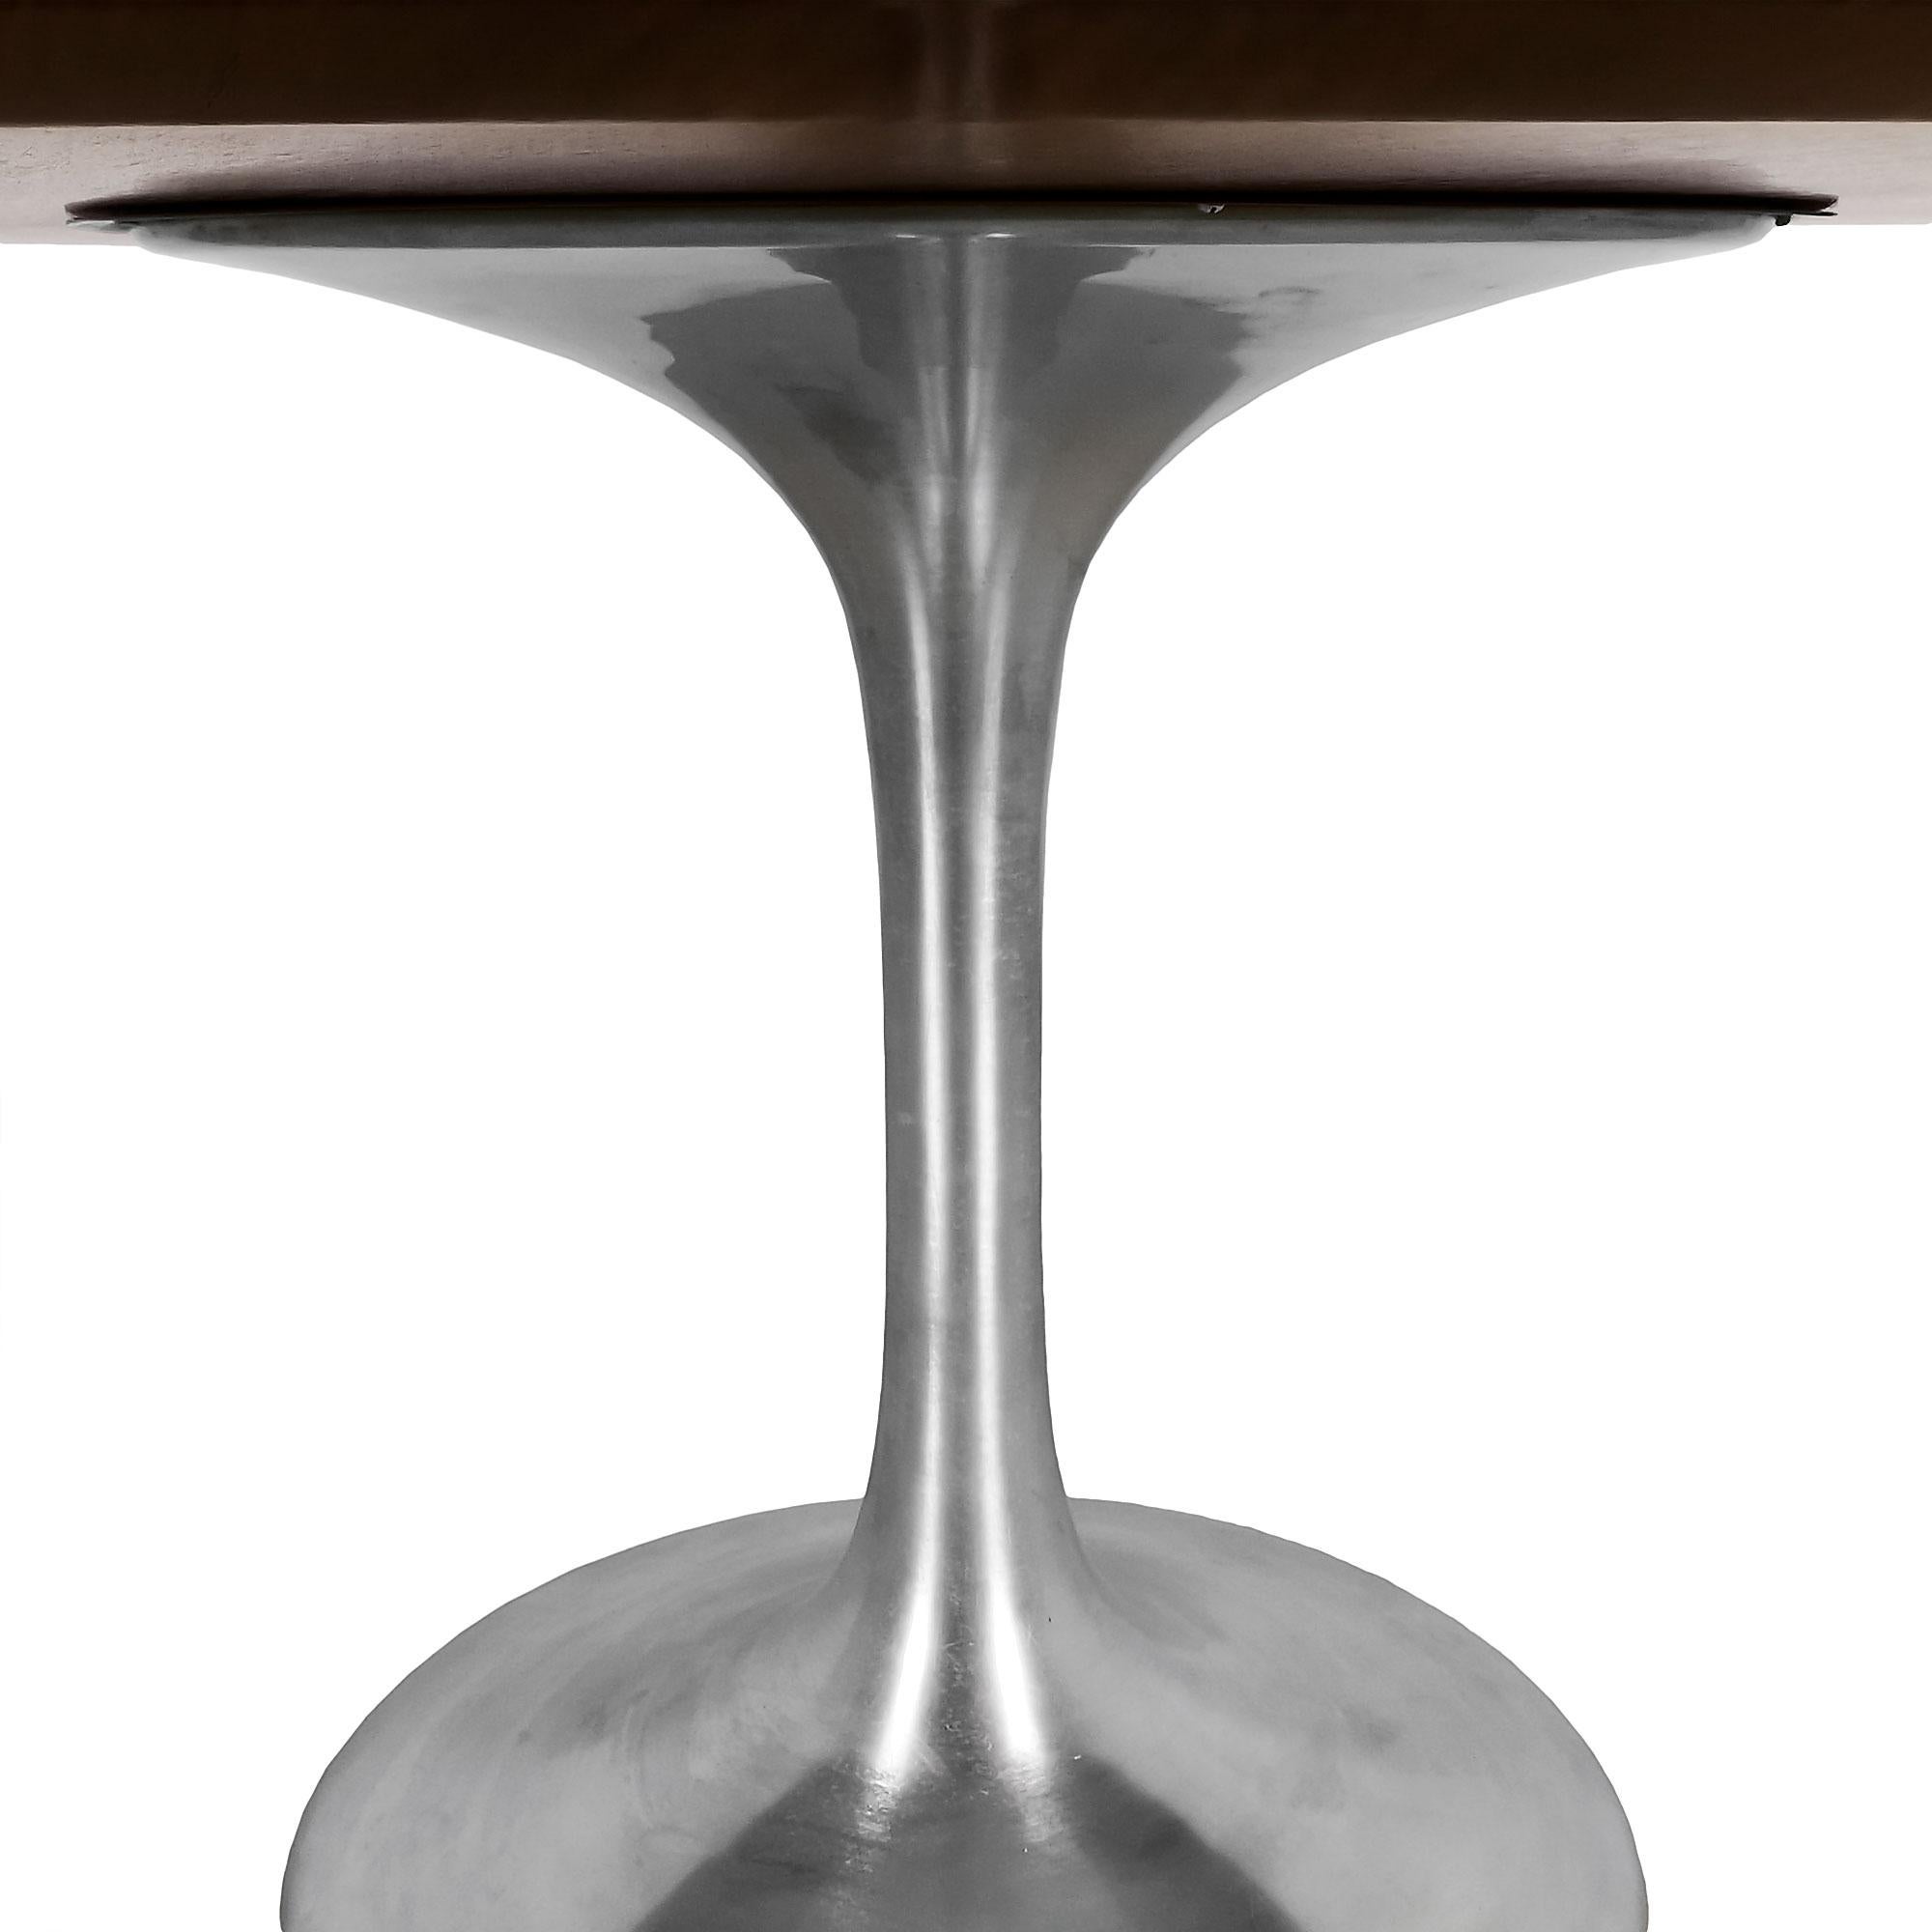 Round table with “tulip” central leg in polished cast aluminium, French polished Indian rosewood top.

Italy c.1960.